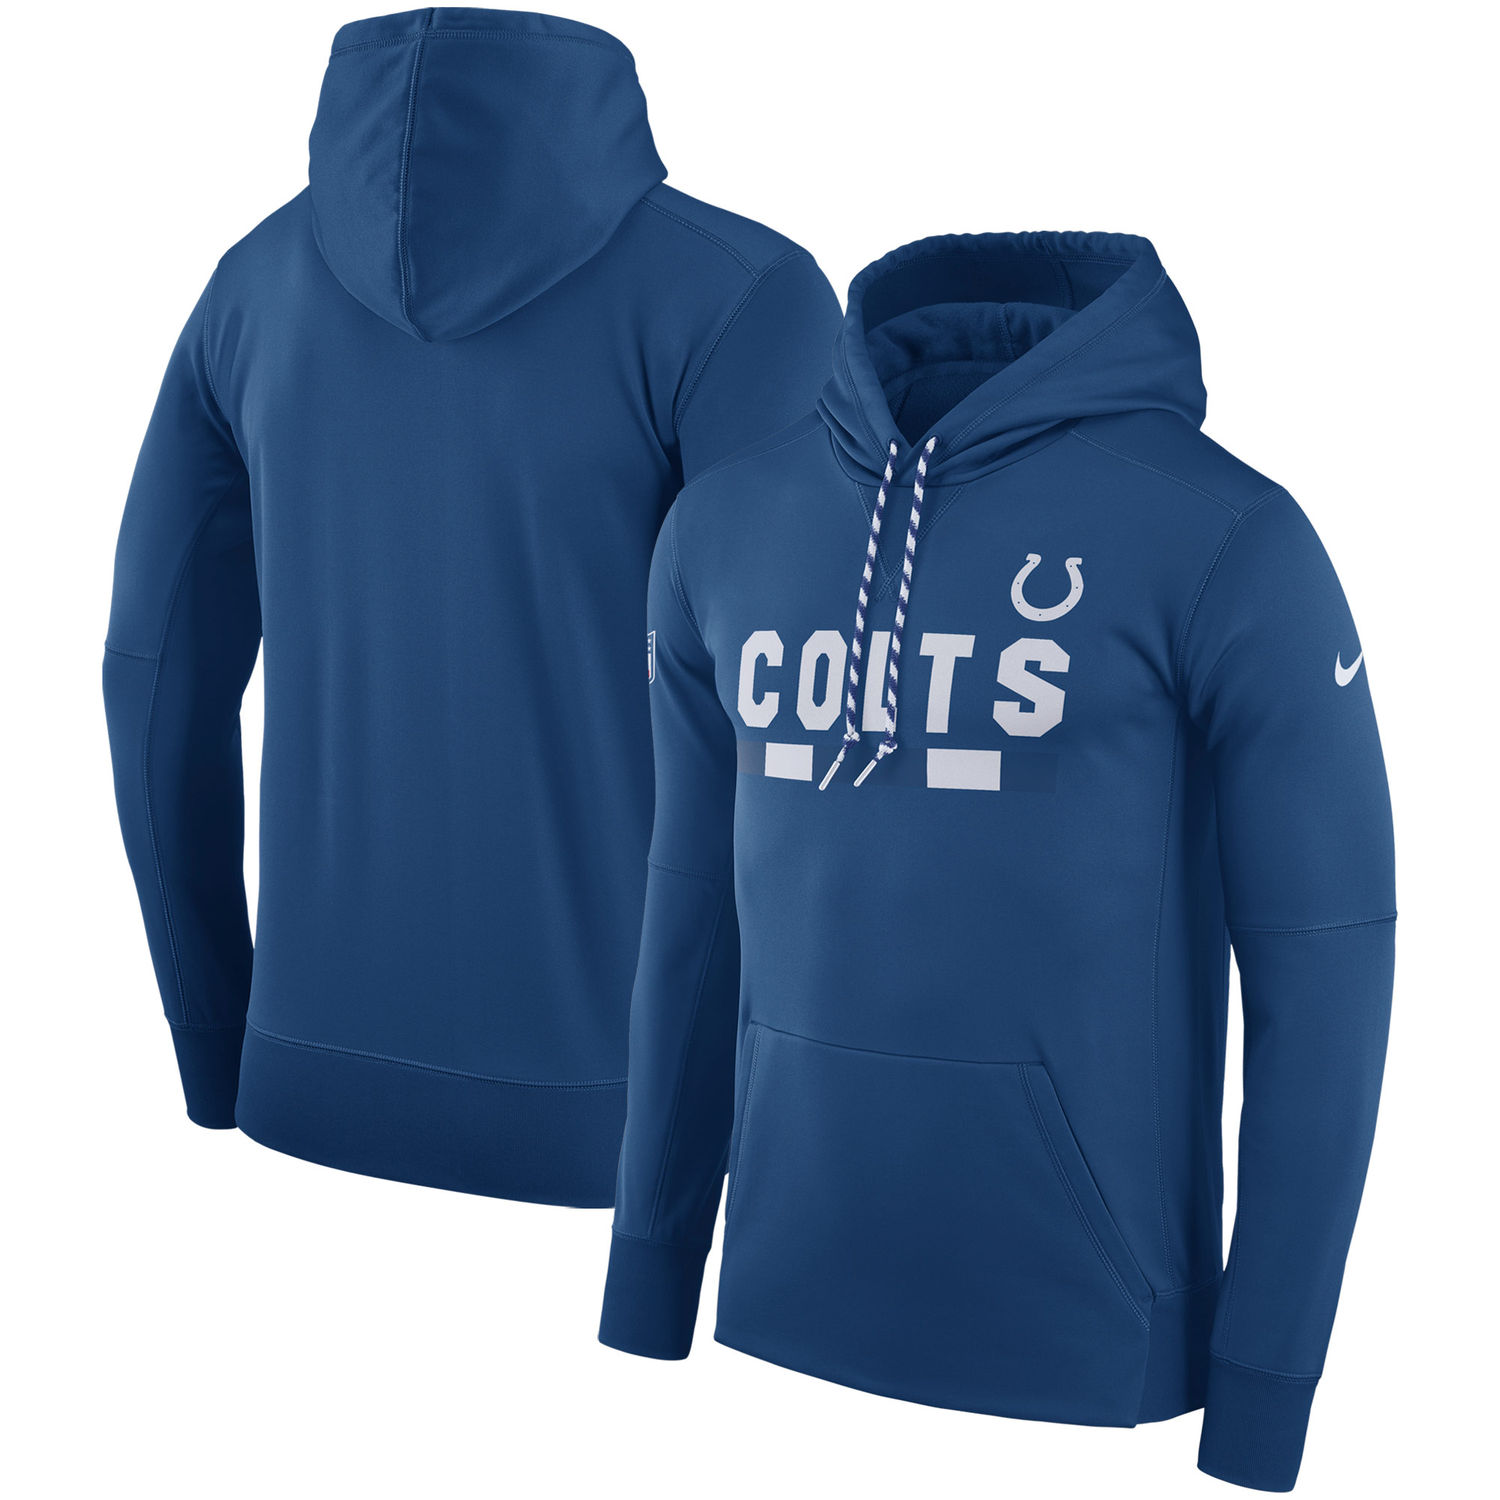 Mens Indianapolis Colts Nike Royal Sideline Team Name Performance Pullover Hoodie